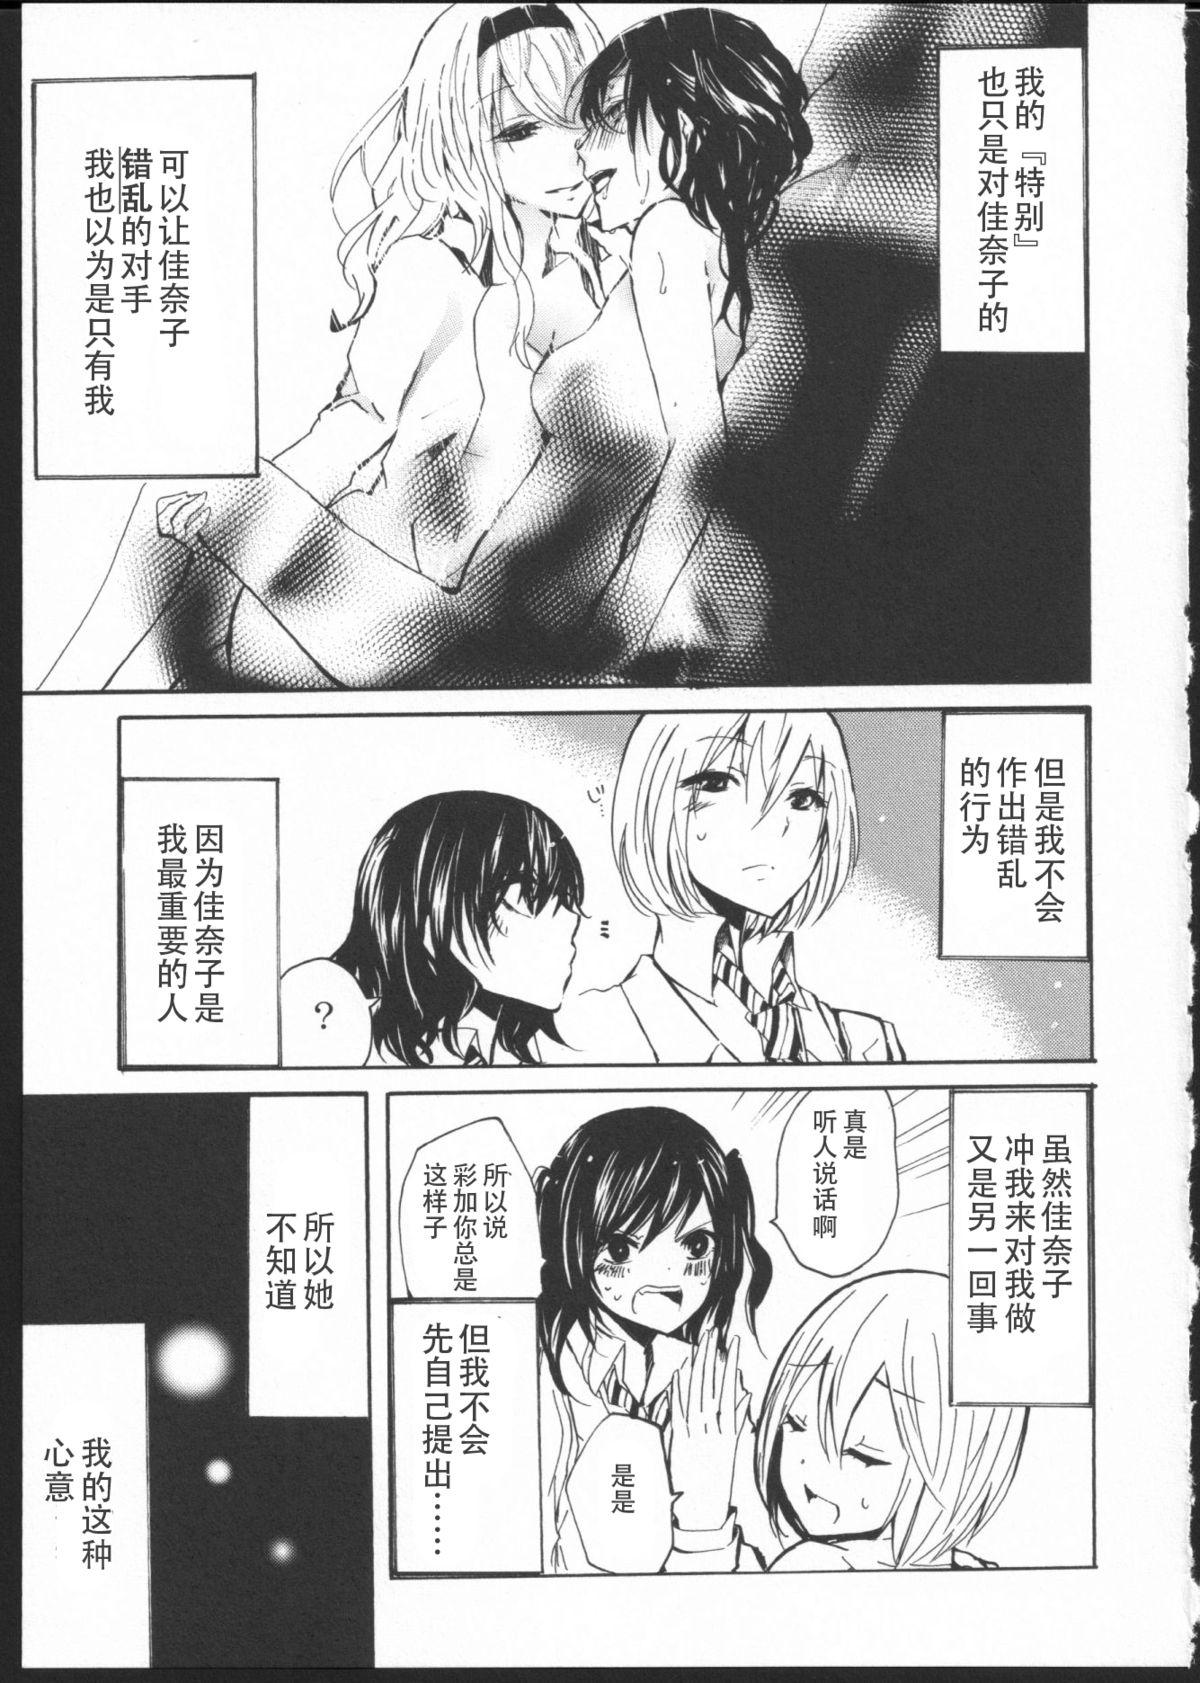 Busty Kimi no Sei Breasts - Page 7